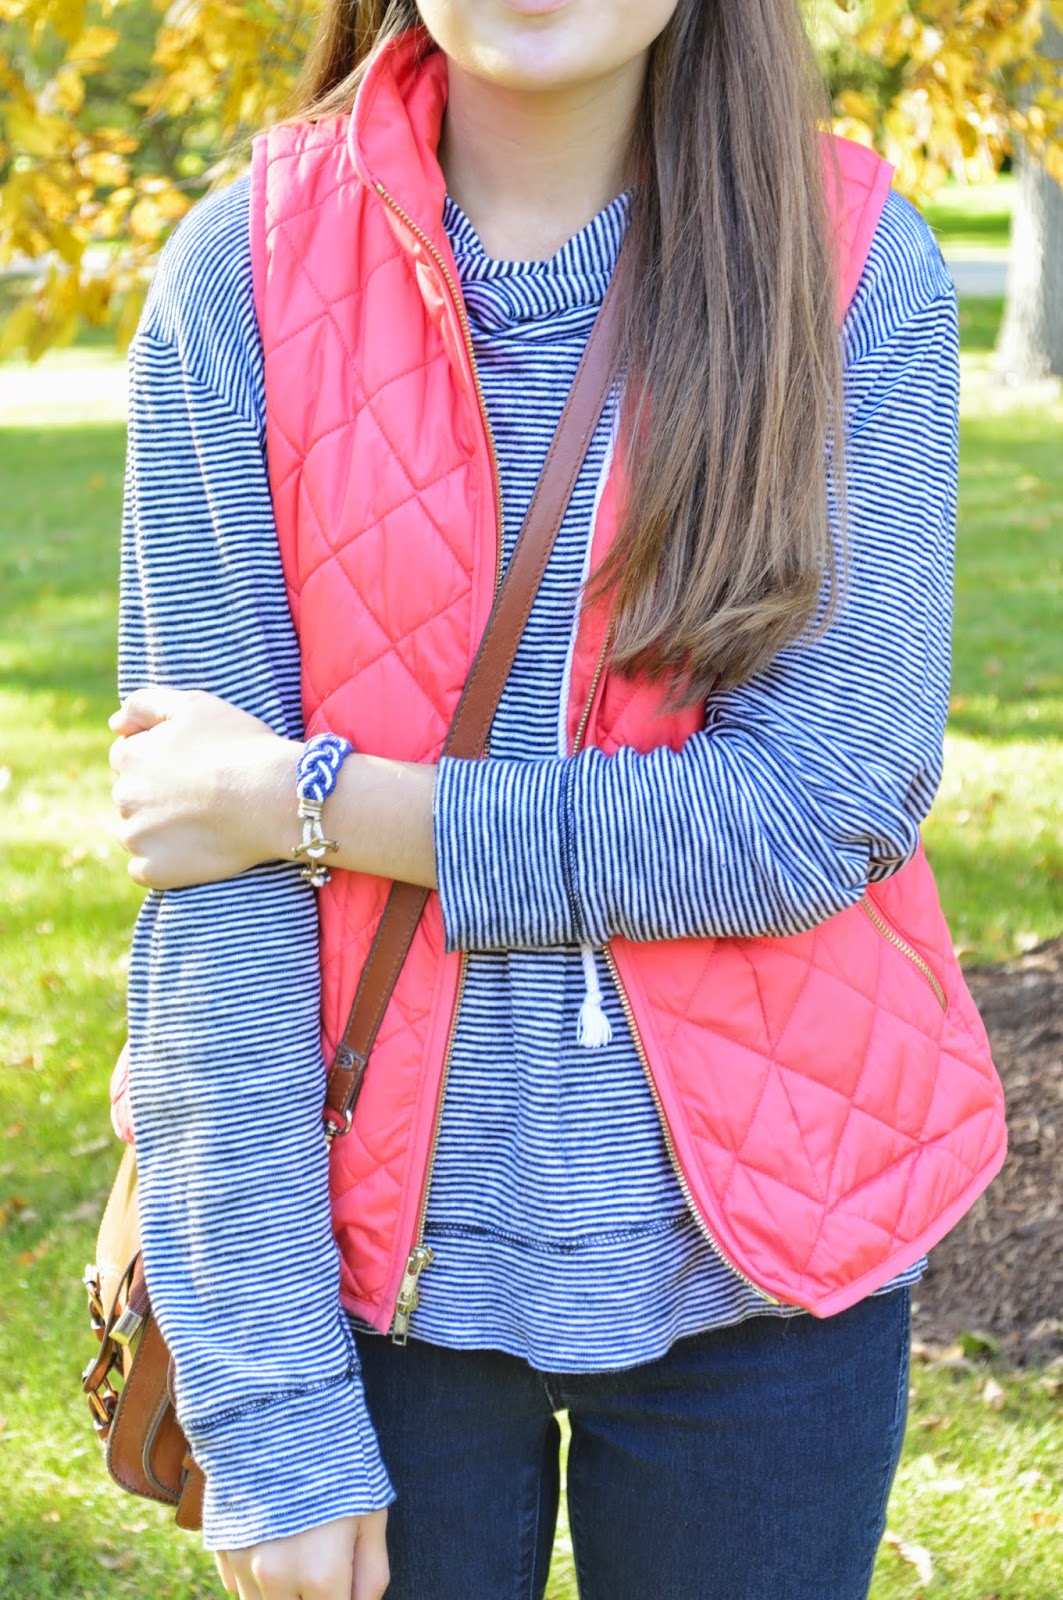 citrus and style: Outfit: Autumn Orange